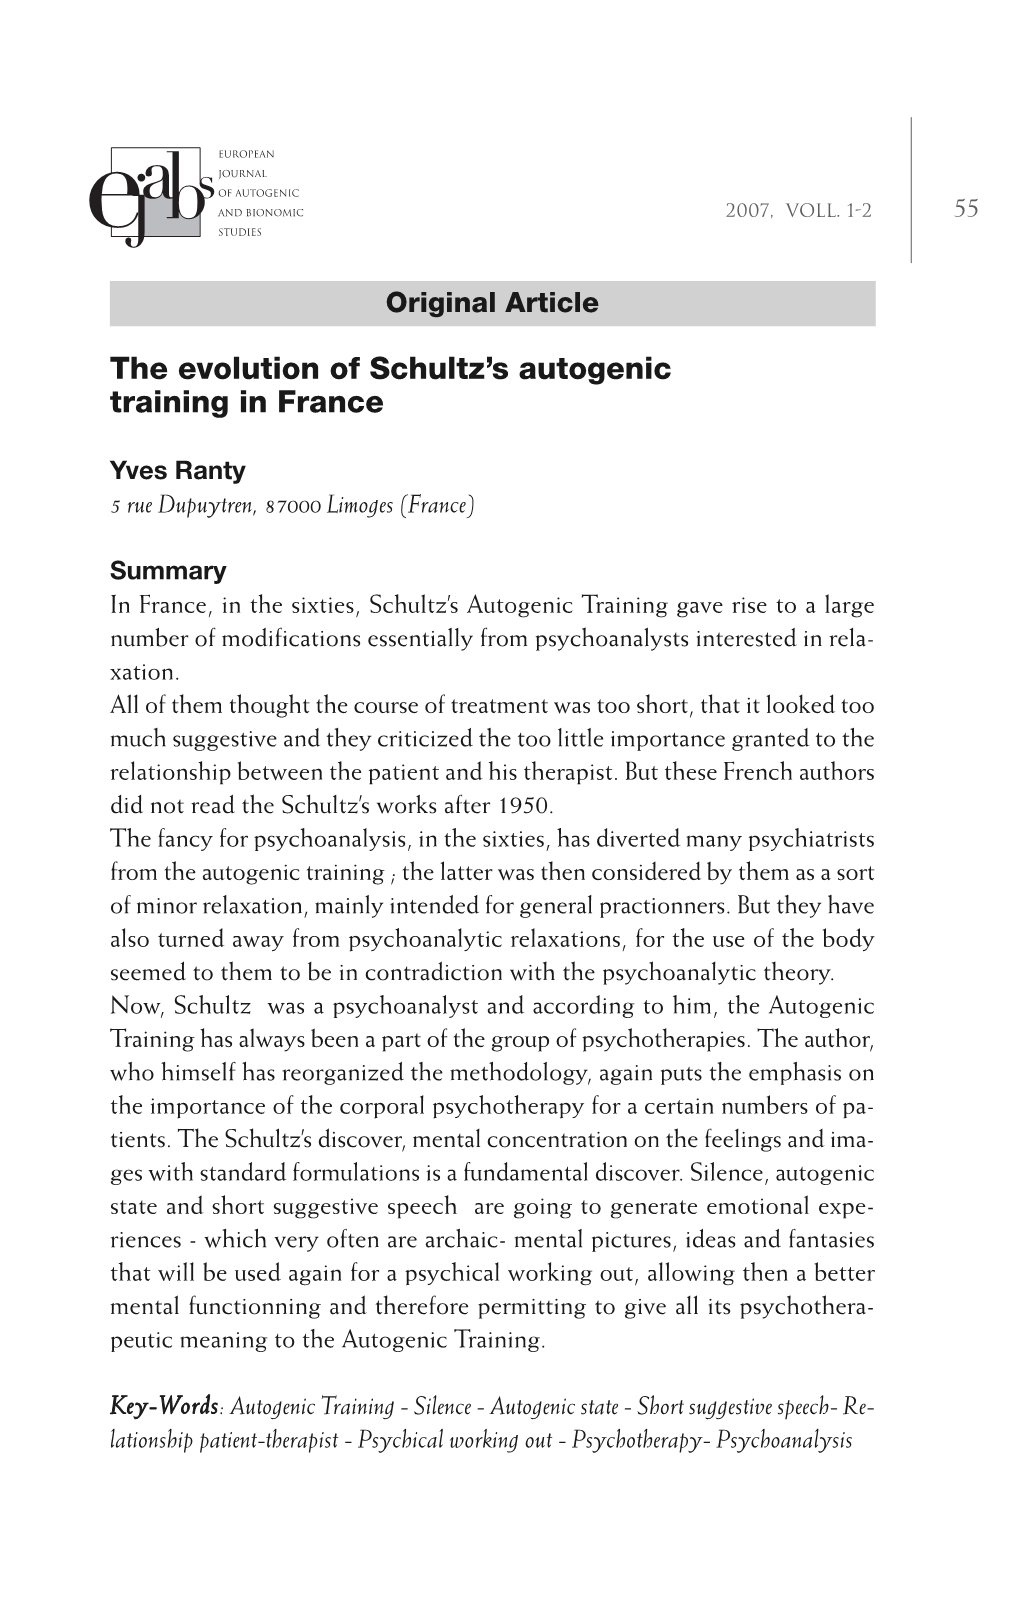 The Evolution of Schultz's Autogenic Training in France